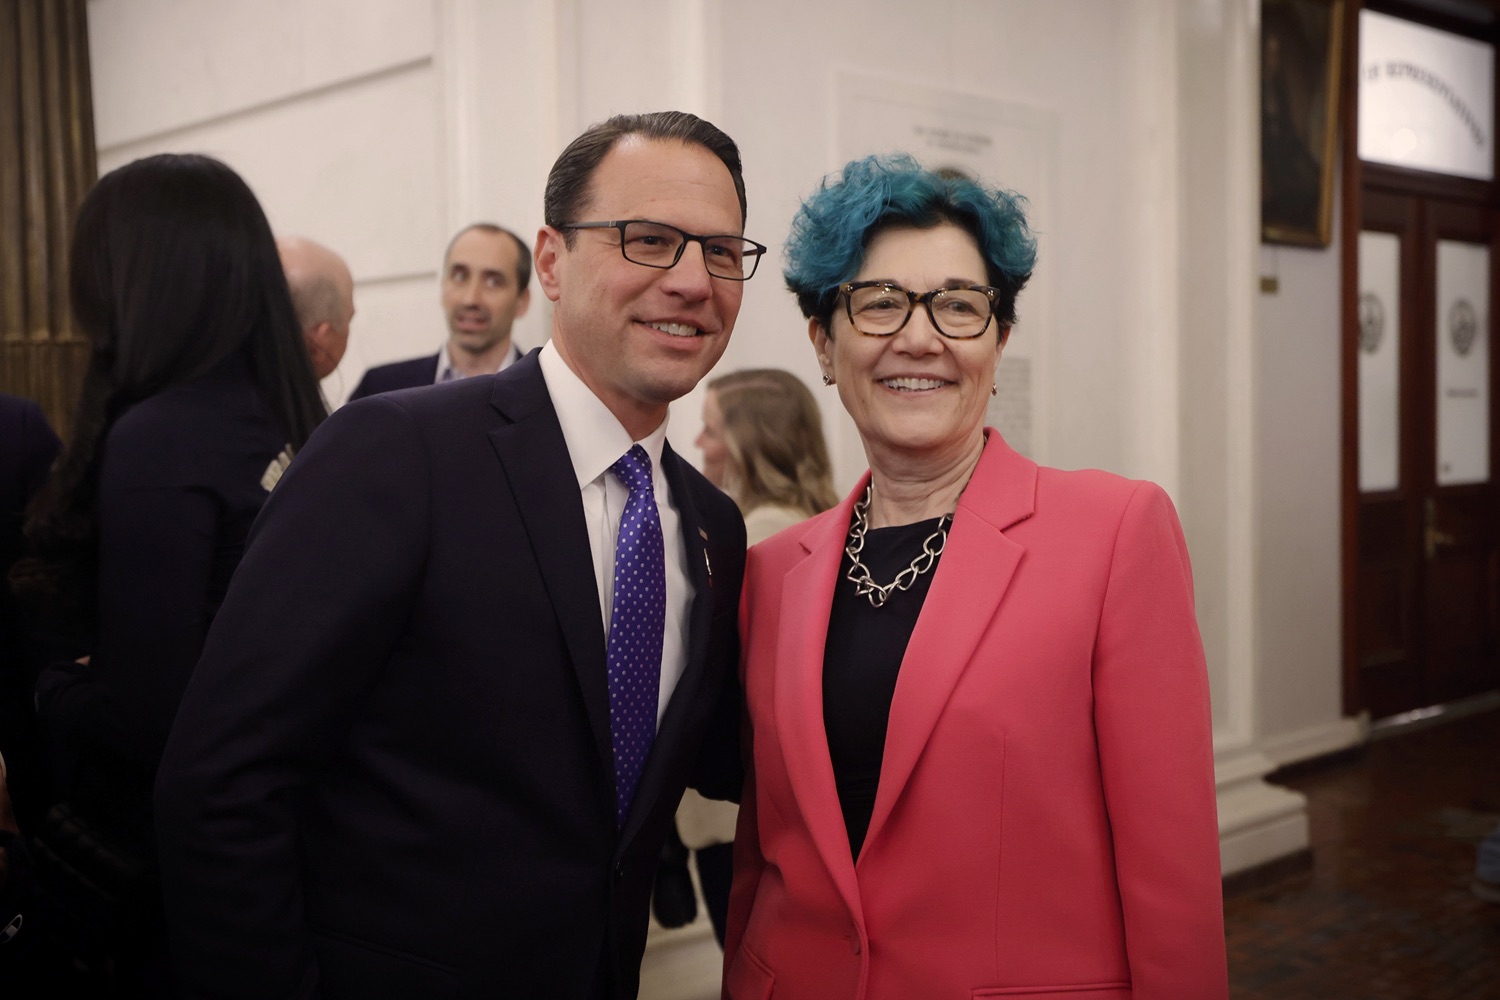 Governor Josh Shapiro signed the first bill of his Administration - Act 1 of 2023, a first-of-its-kind law in the nation that will require insurers to cover preventive breast and ovarian cancer screenings for high-risk women at no cost. MAY 01, 2023 - HARRISBURG, PA<br><a href="https://filesource.amperwave.net/commonwealthofpa/photo/23041_gov_sb8_dz_021.JPG" target="_blank">⇣ Download Photo</a>